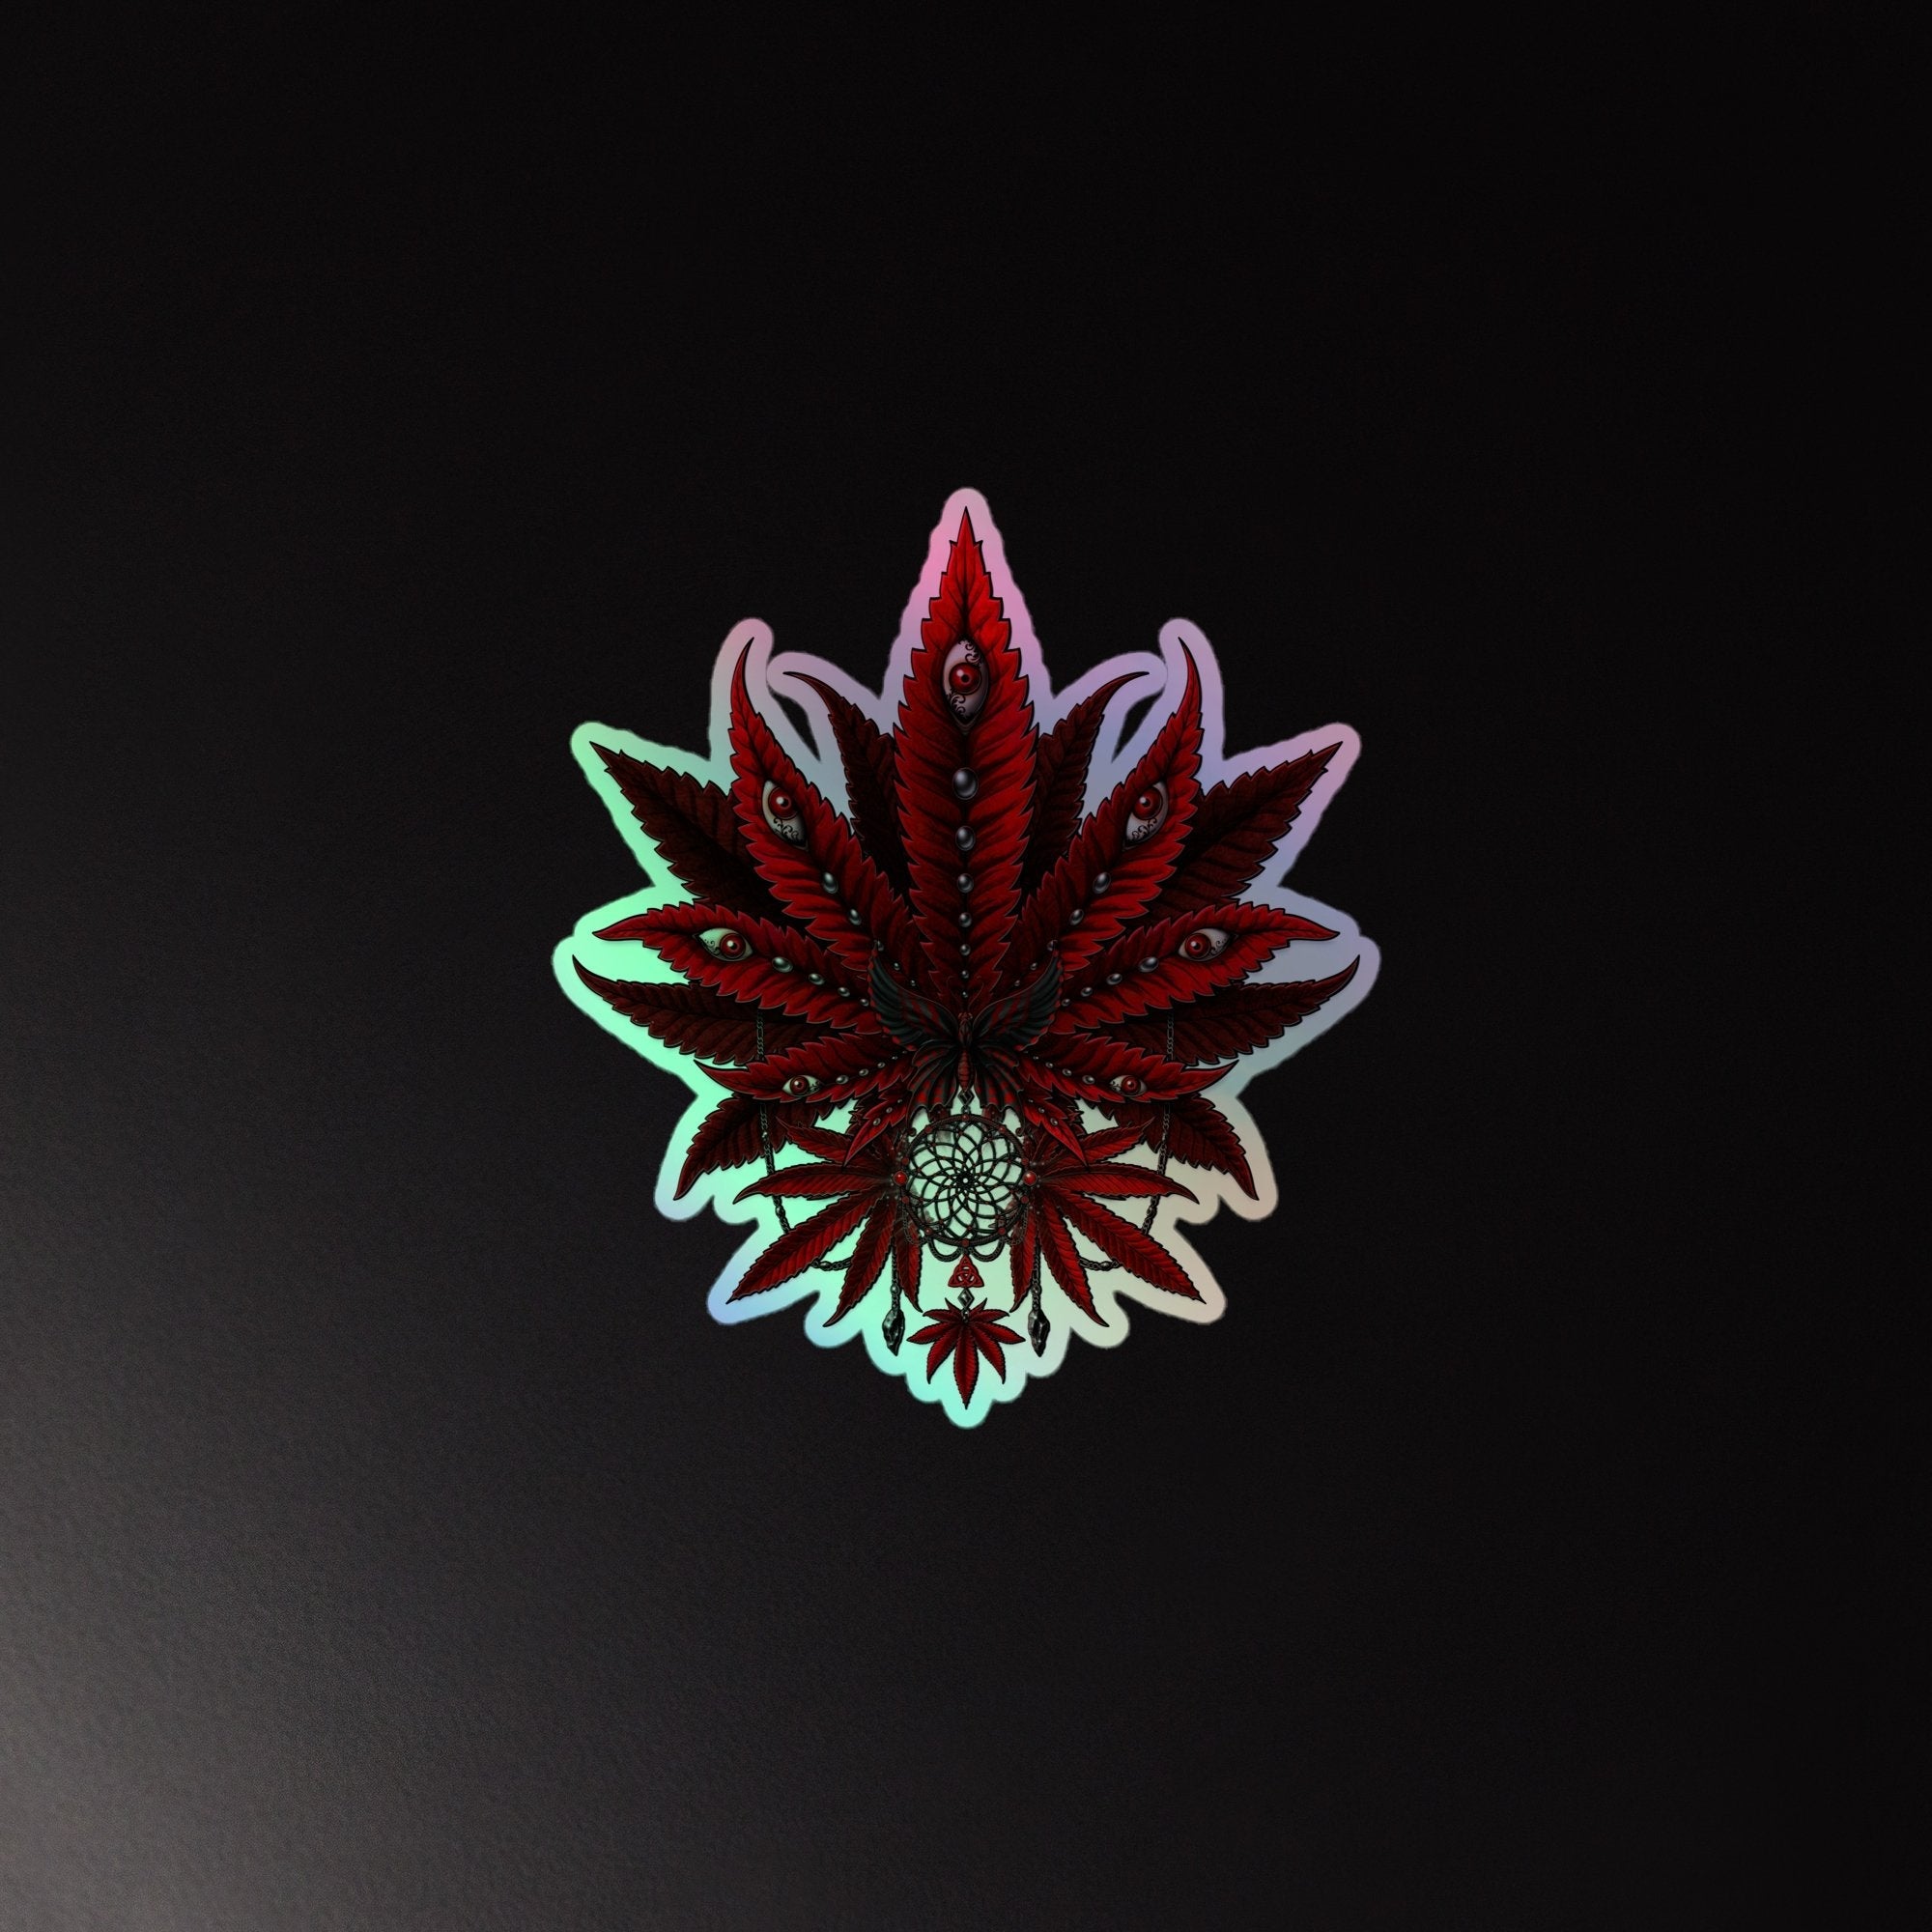 Holographic Cannabis Stickers, Weed Decal, Colorful Pot Leaf Vinyl, Small 420 Gift - Abysm Internal